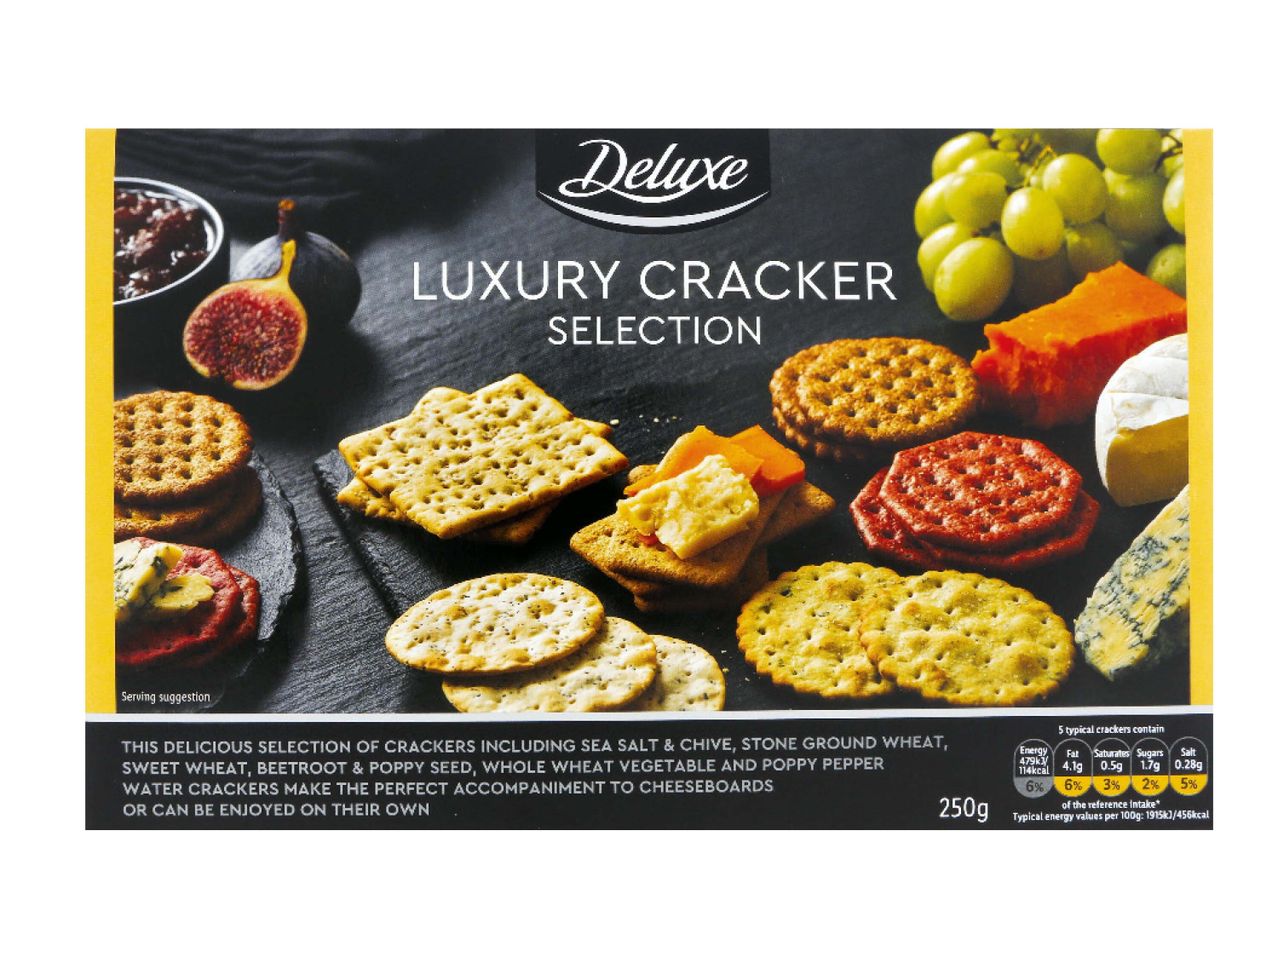 Go to full screen view: Luxury Cracker Selection - Image 1